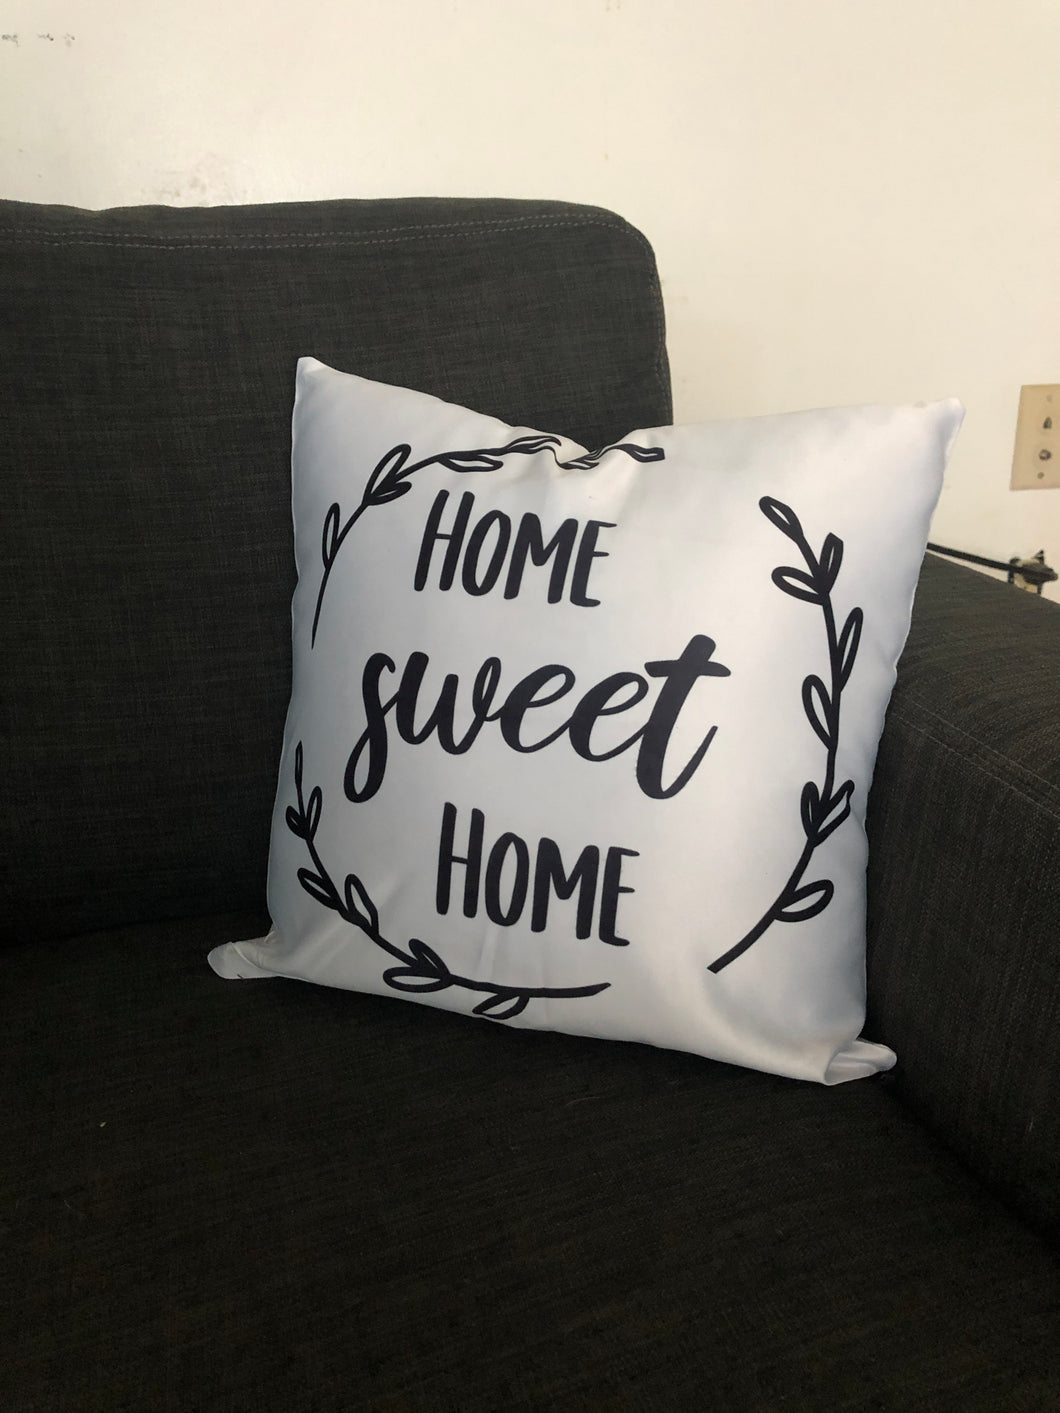 Home Sweet Home pillow case cover